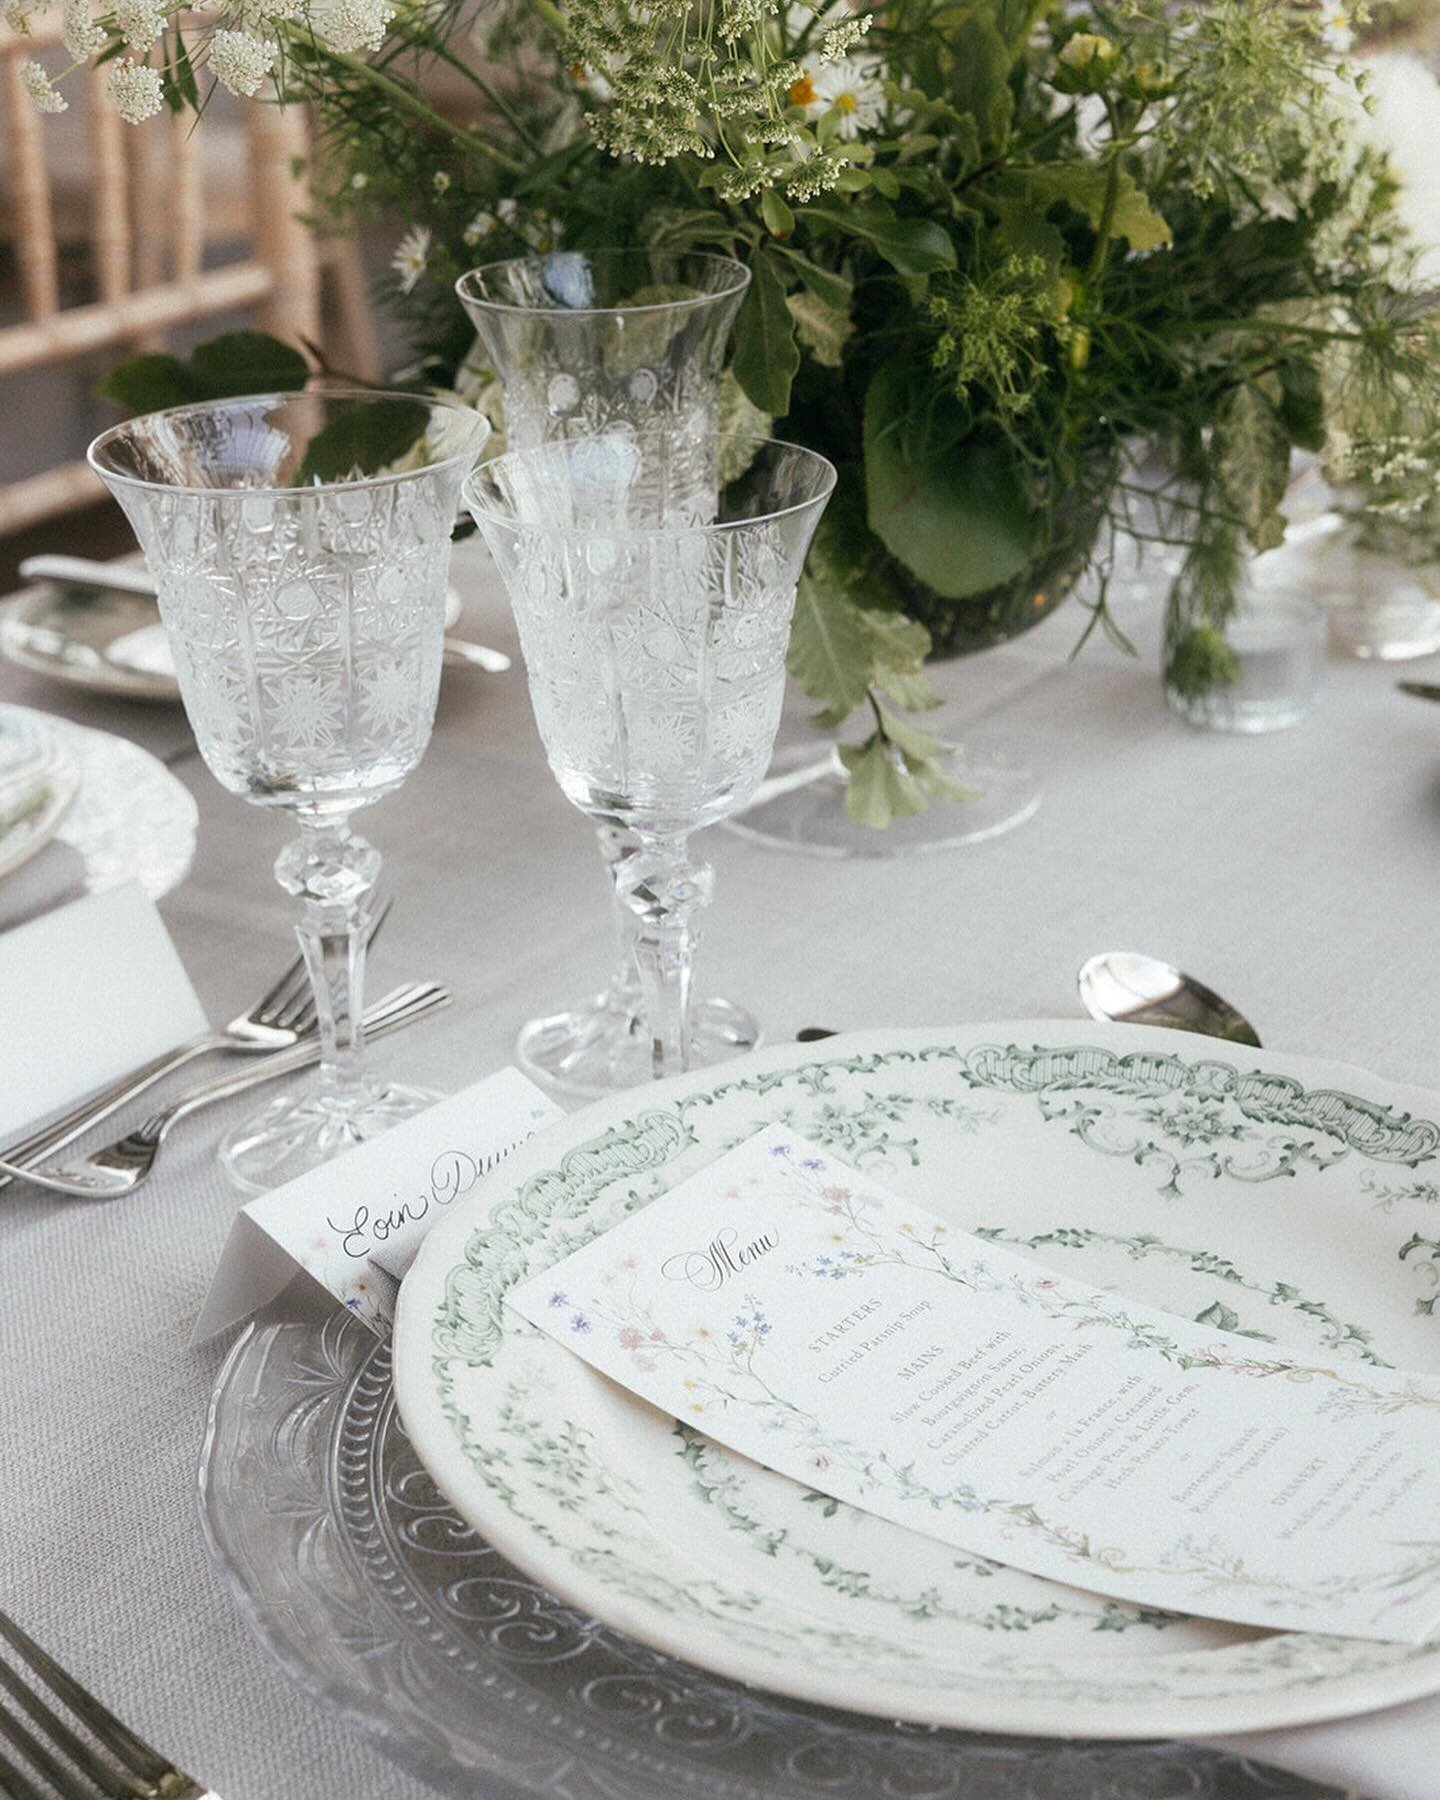 We sourced this bespoke tablescape via our wonderful UK supplier &amp; to say it added warmth &amp; decadence to these long banquet tables, is an understatement. Beautifully complimented by delicately floral blooms &amp; paper goods, it made our brid